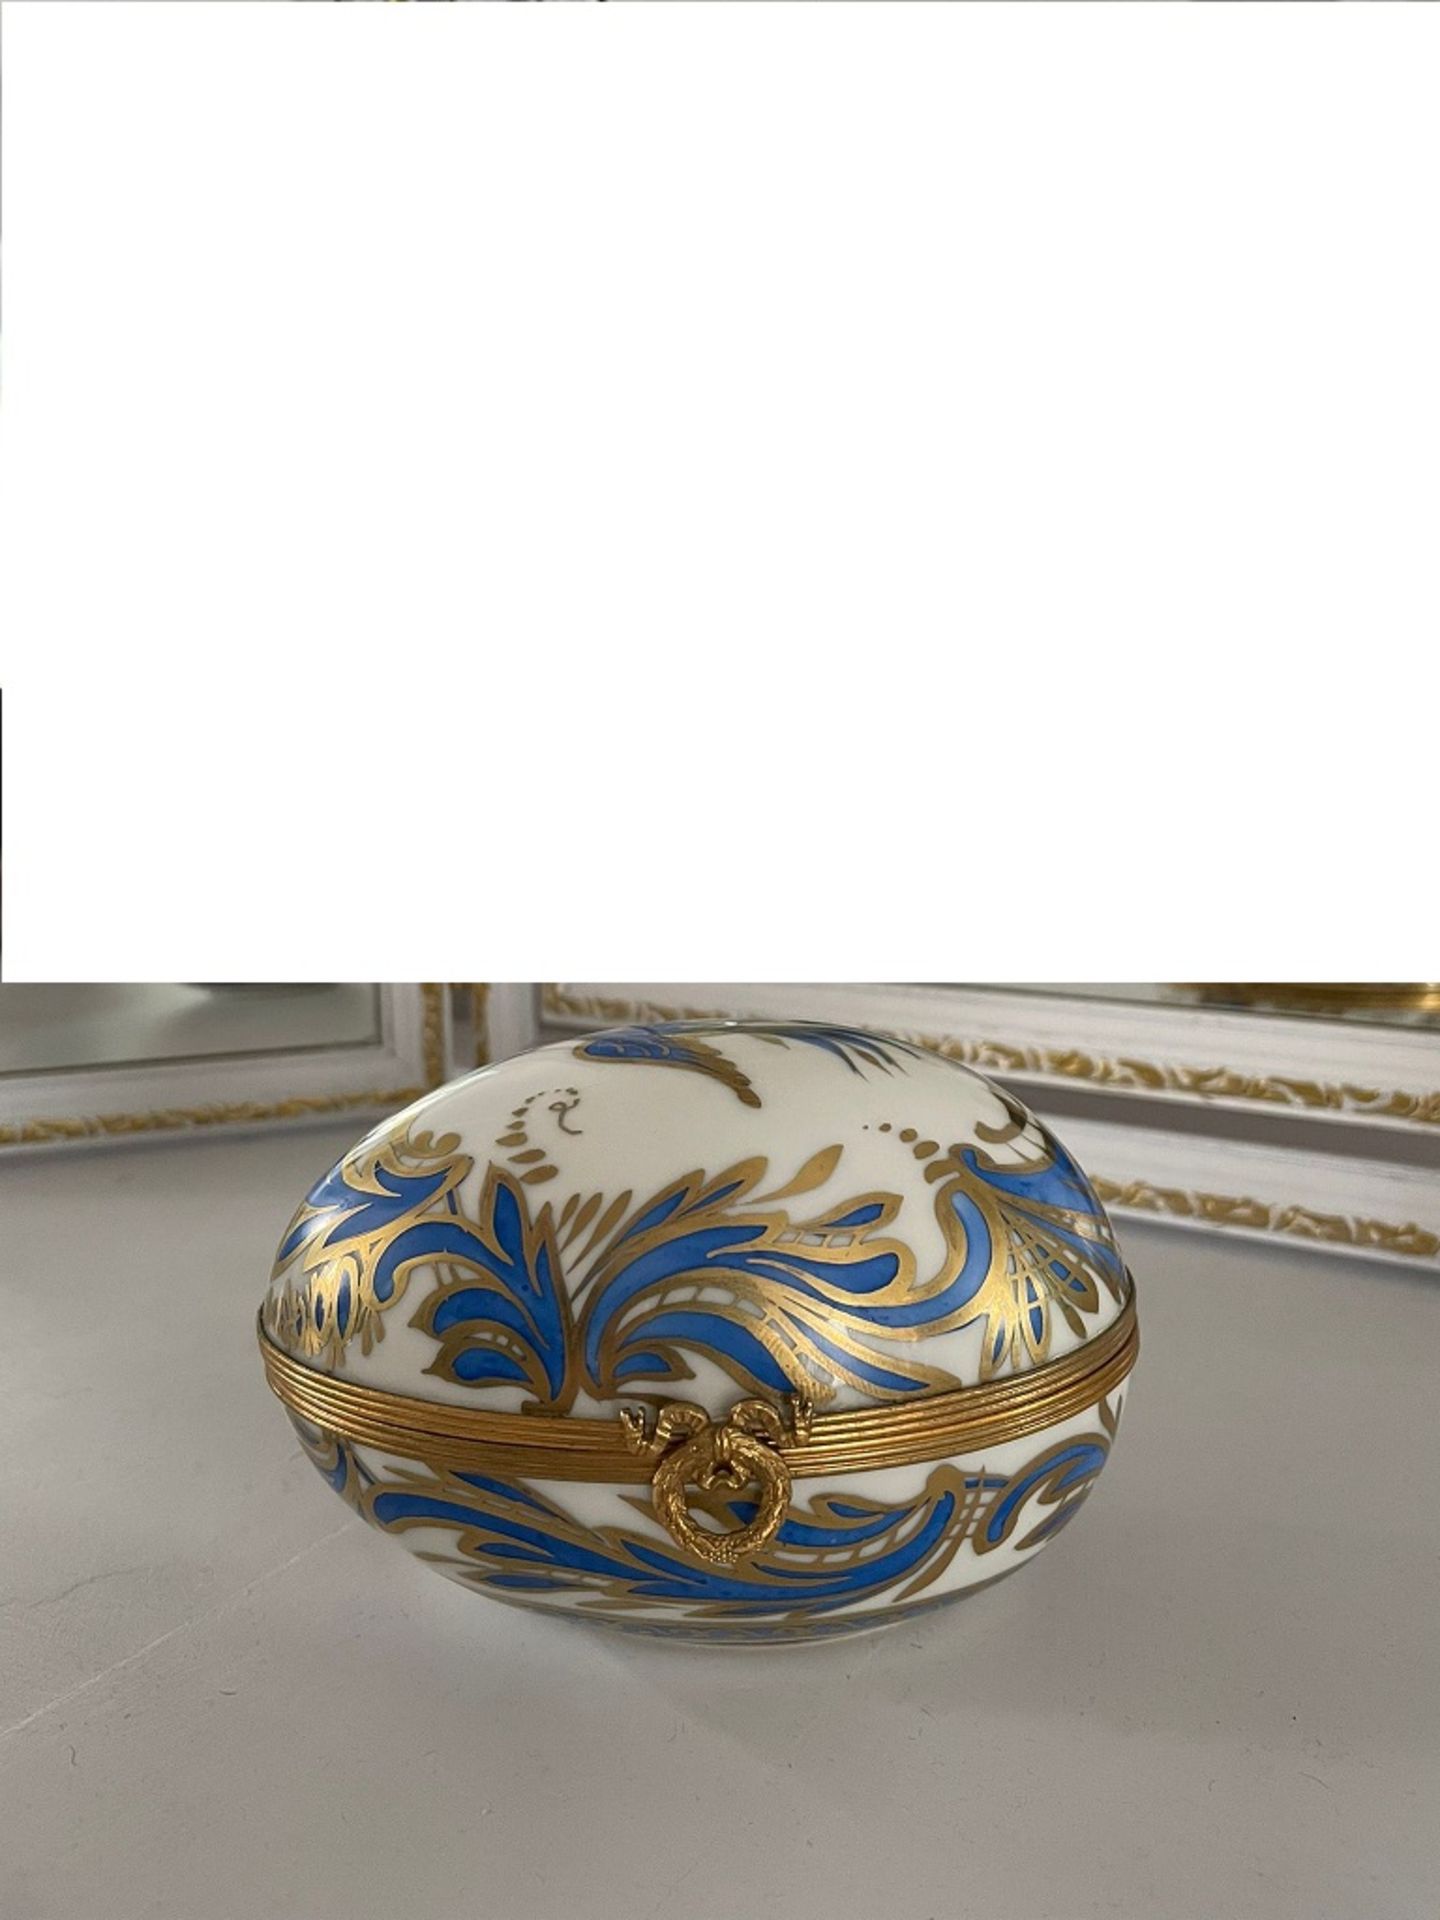 APPROX 1850's SERVES GOLD & BLUE COLOURED OPENING EGG - Image 2 of 6